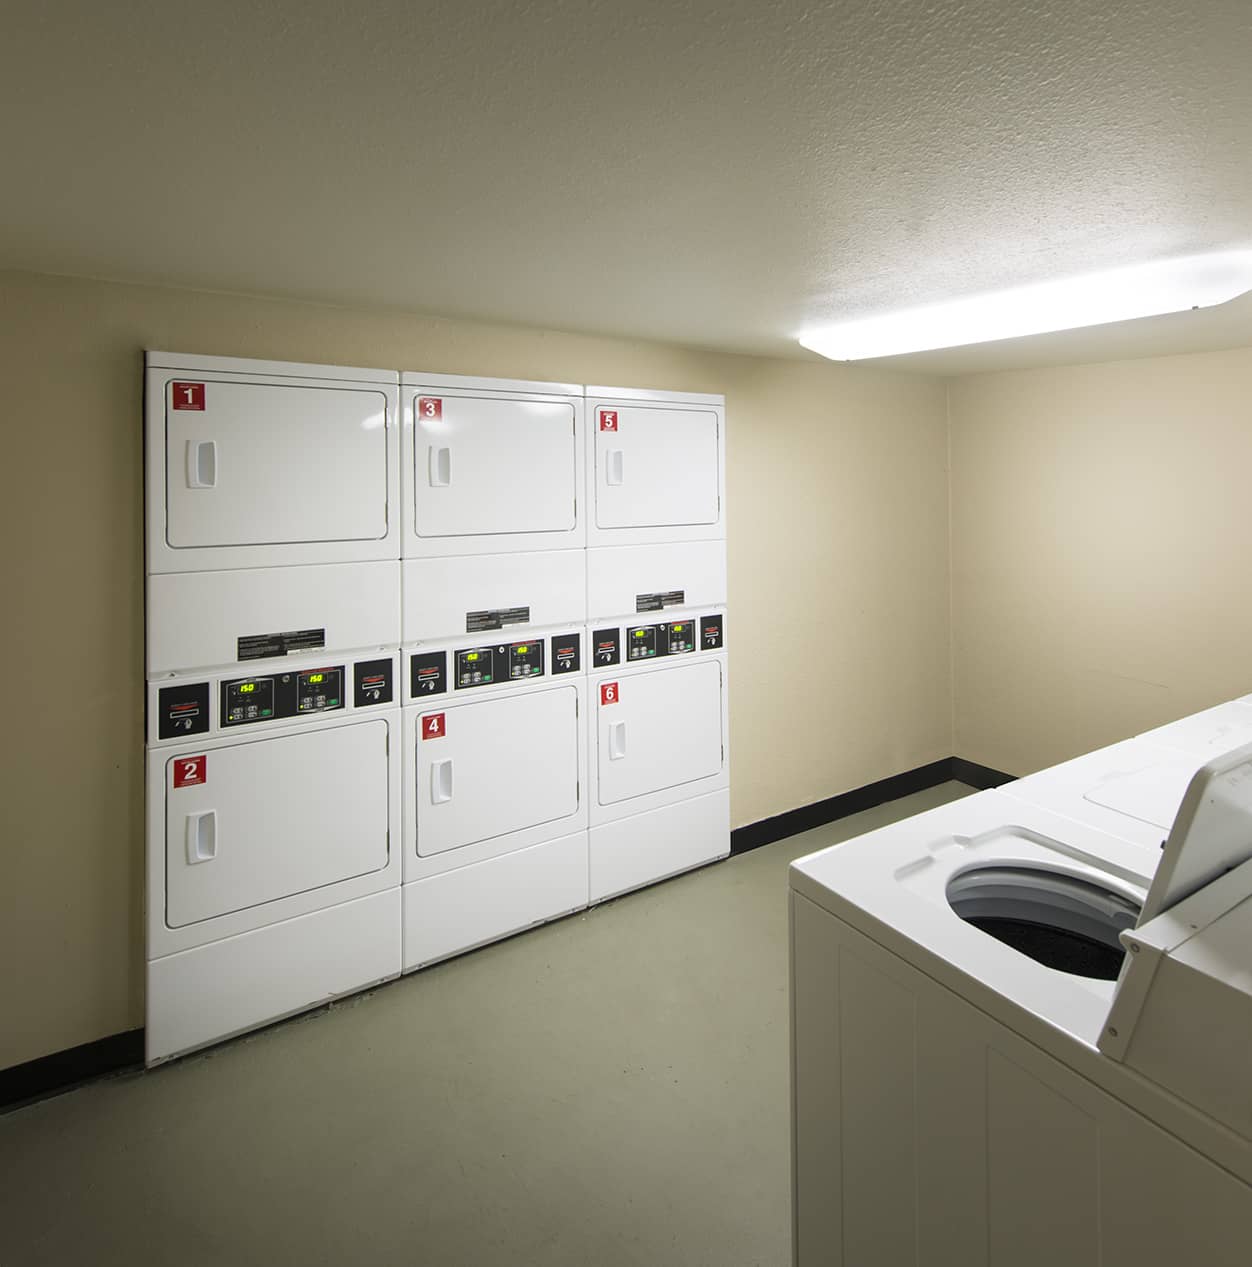 Crown Pointe Laundry Room